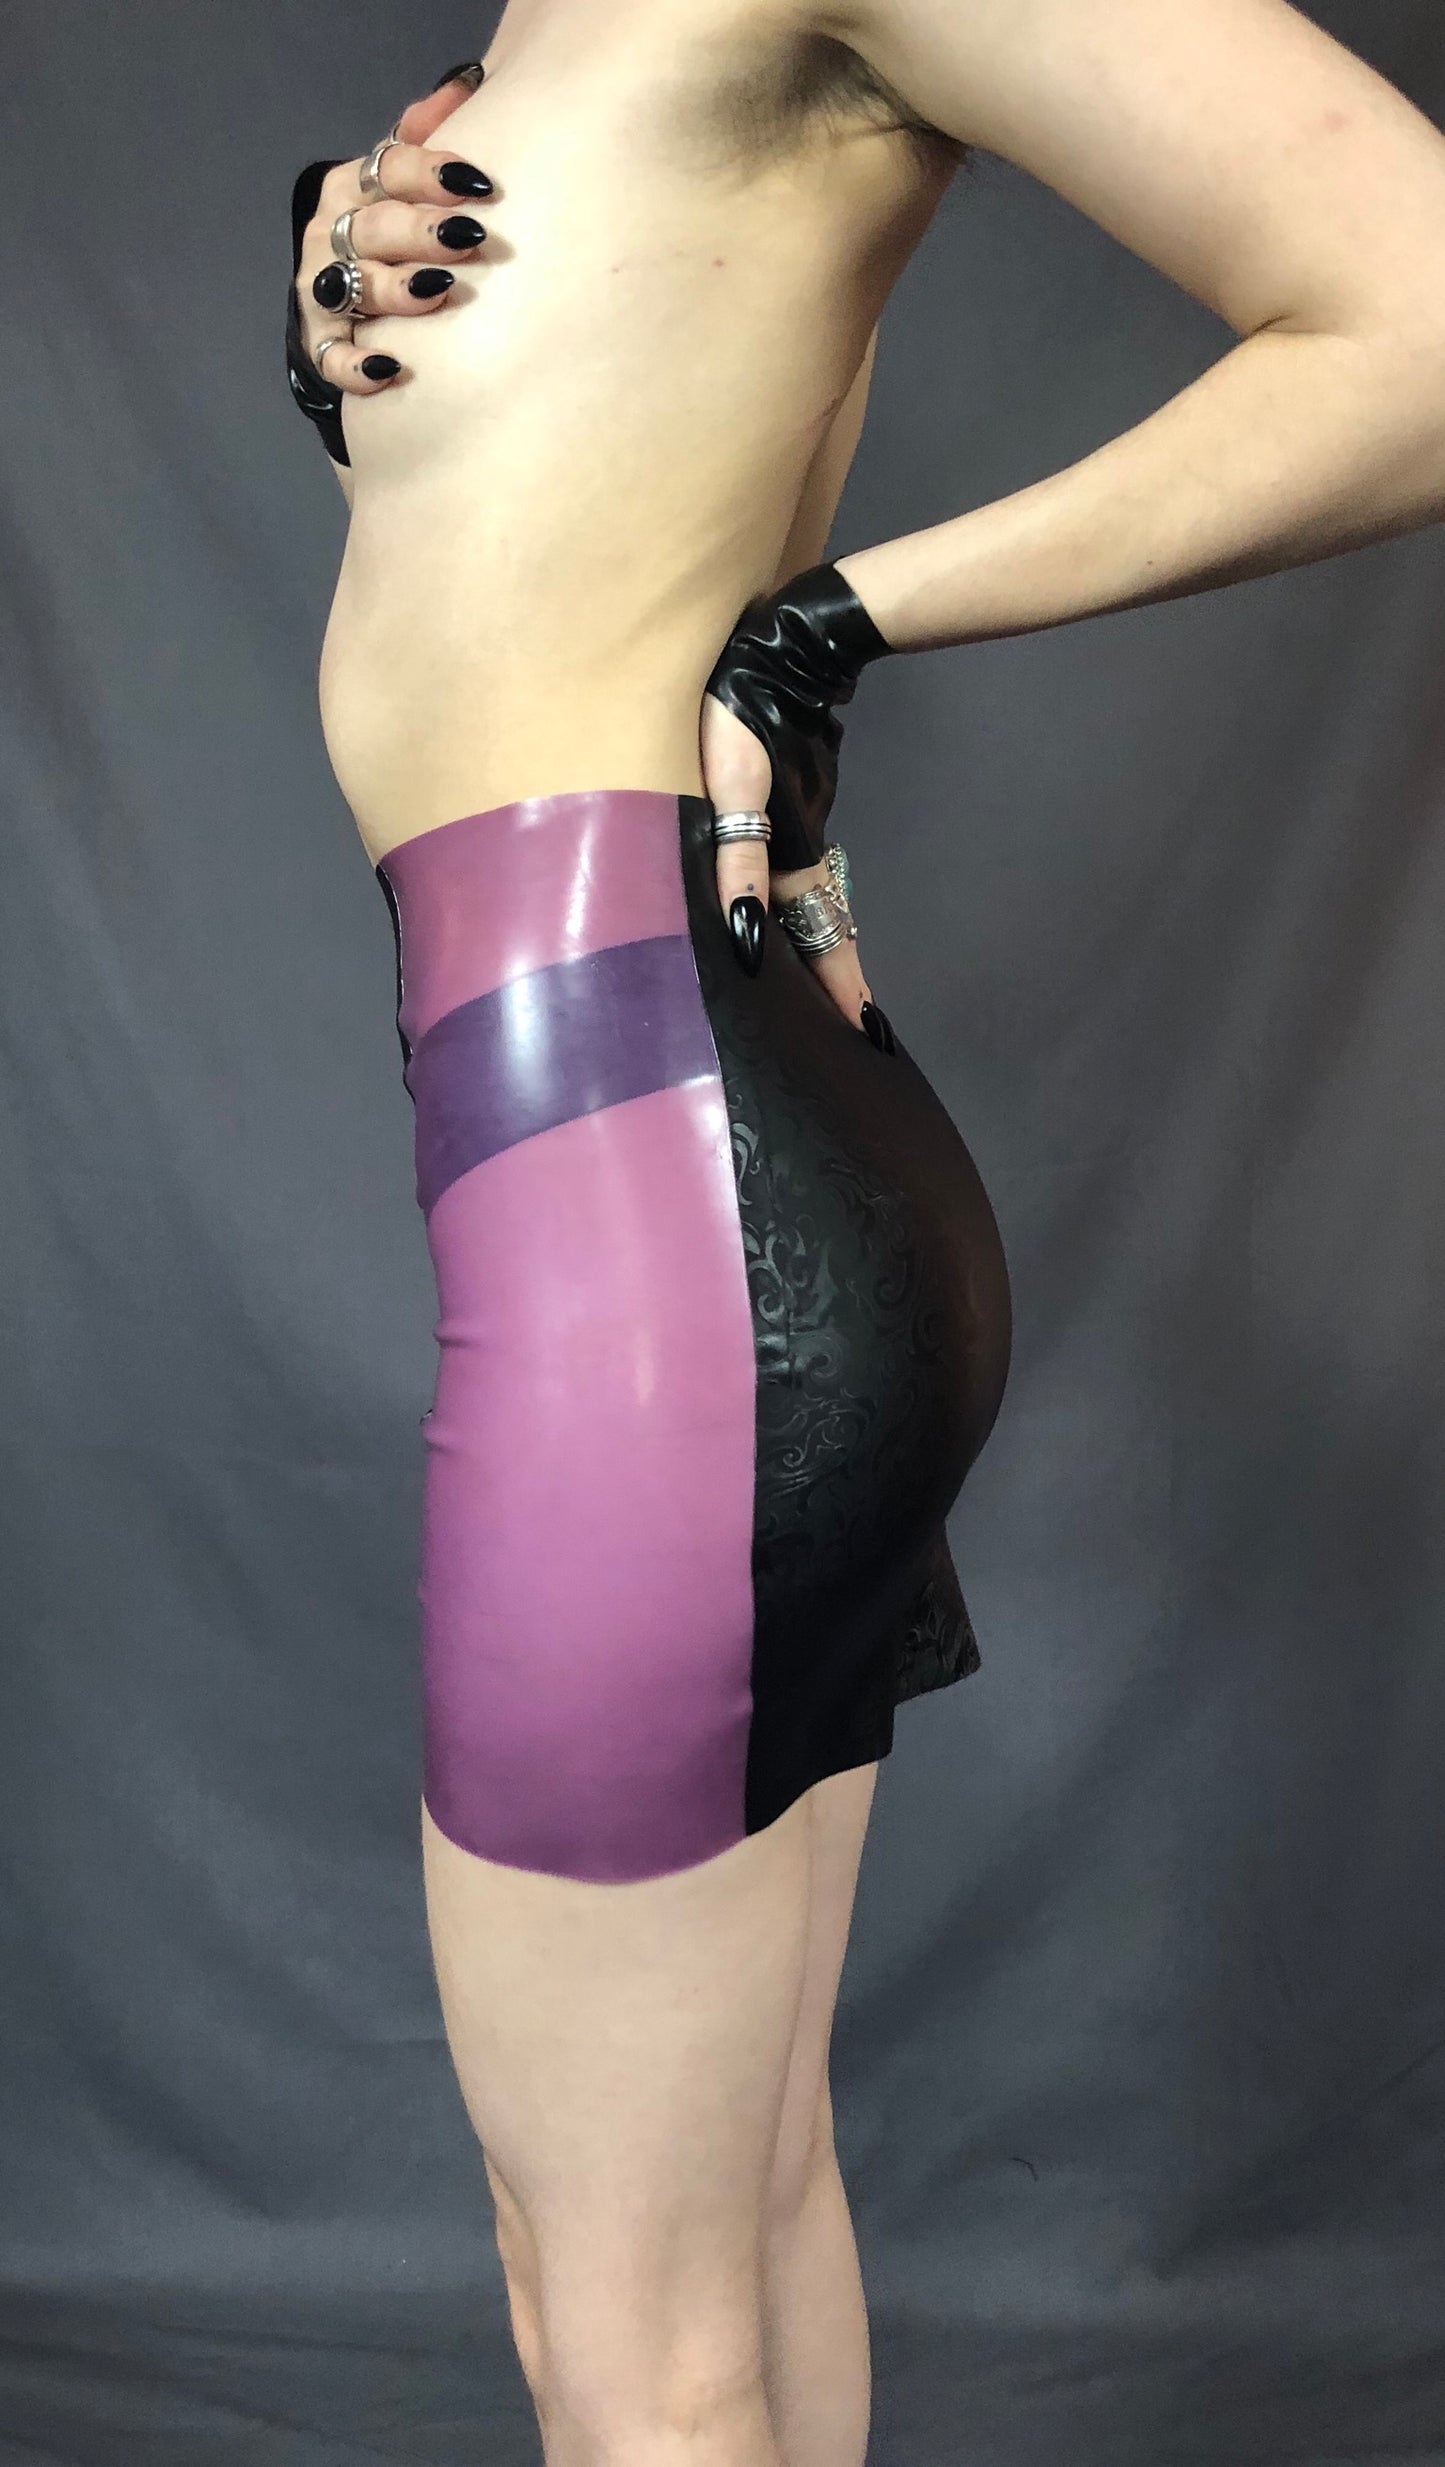 A feminine model holding a black latex gloved hand over their breasts showing the left of the black and magenta Latex Girdle Mini Skirt.